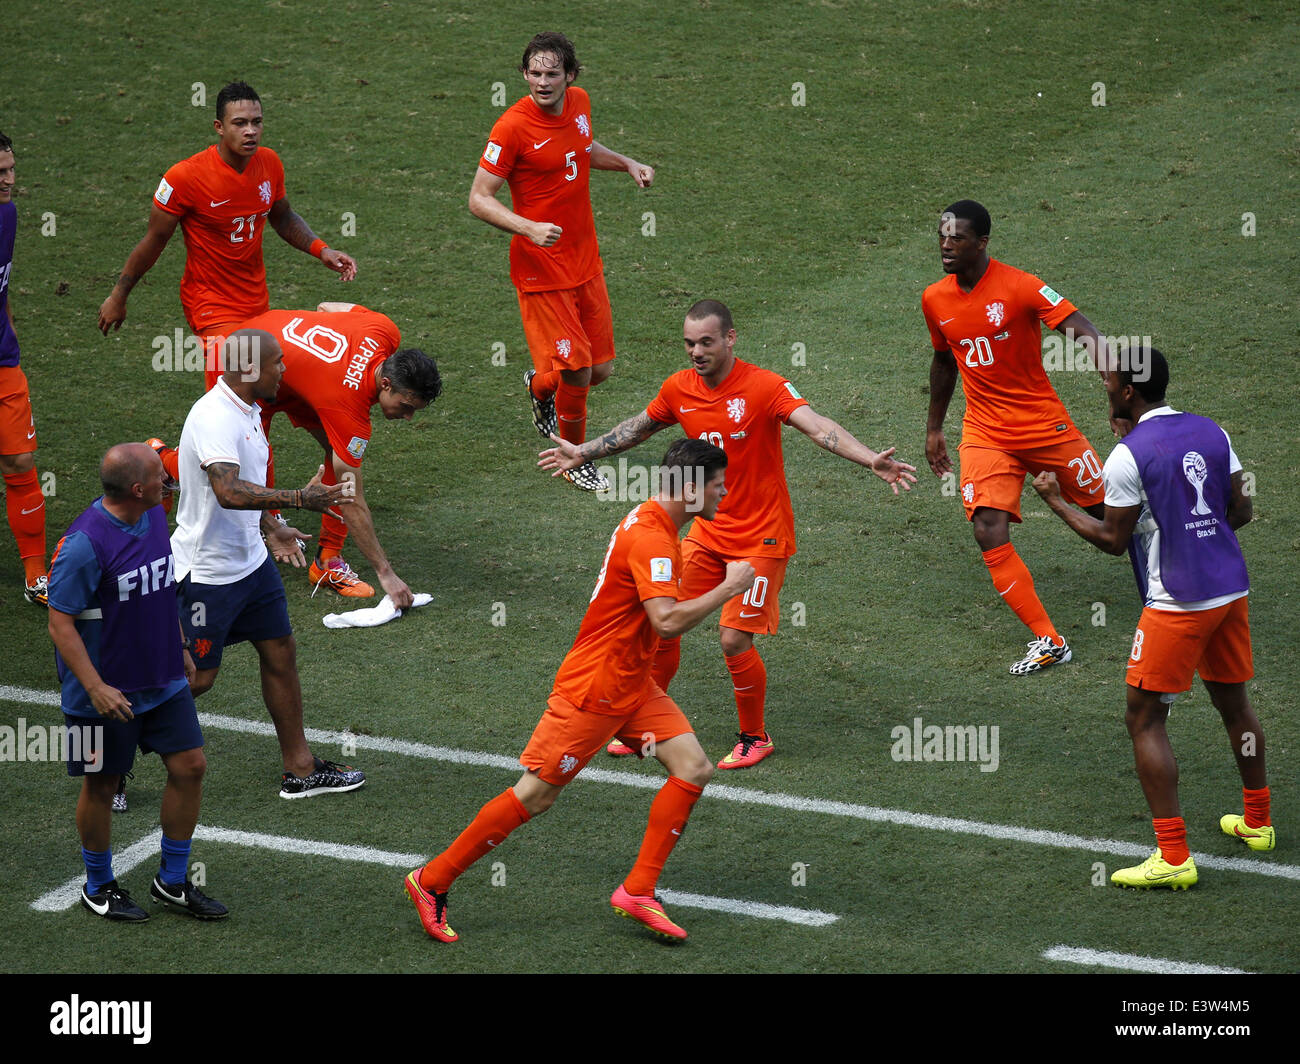 (140629) -- FORTALEZA, June 29, 2014 (Xinhua) -- Netherlands' Wesley Sneijder (3rd R) celebrates a goal with teammates during a Round of 16 match between Netherlands and Mexico of 2014 FIFA World Cup at the Estadio Castelao Stadium in Fortaleza, Brazil, on June 29, 2014. Netherlands won 2-1 over Mexico and qualified for Quarter-finals on Sunday. (Xinhua/Liao Yujie)(pcy) Stock Photo